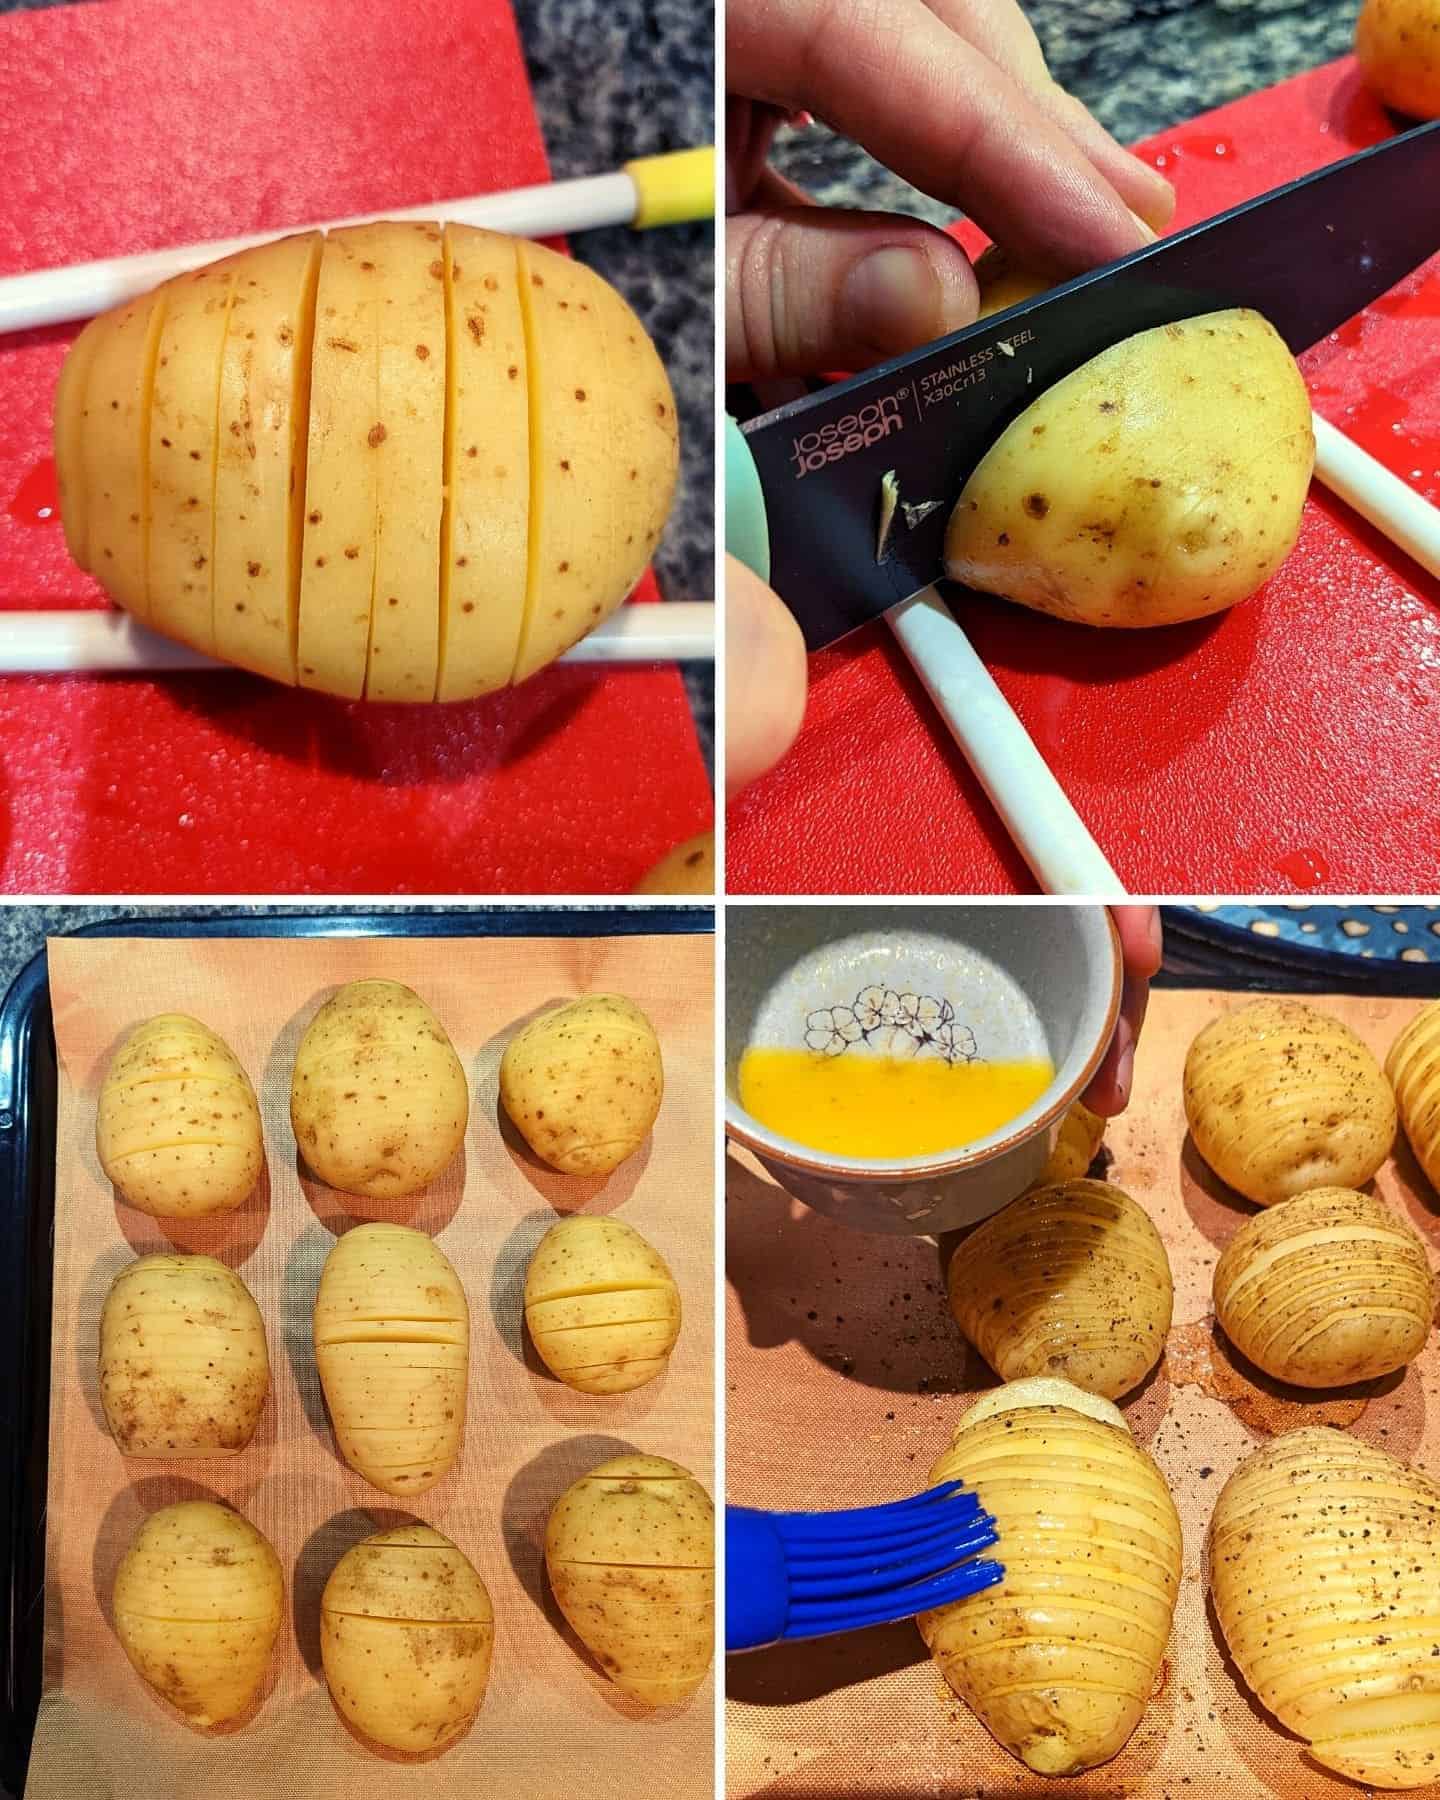 A 4 part collage showing a potato being cut in between chopsticks, once it's been chopped, 6 potatoes on a baking tray and melted butter being brushed onto the potatoes